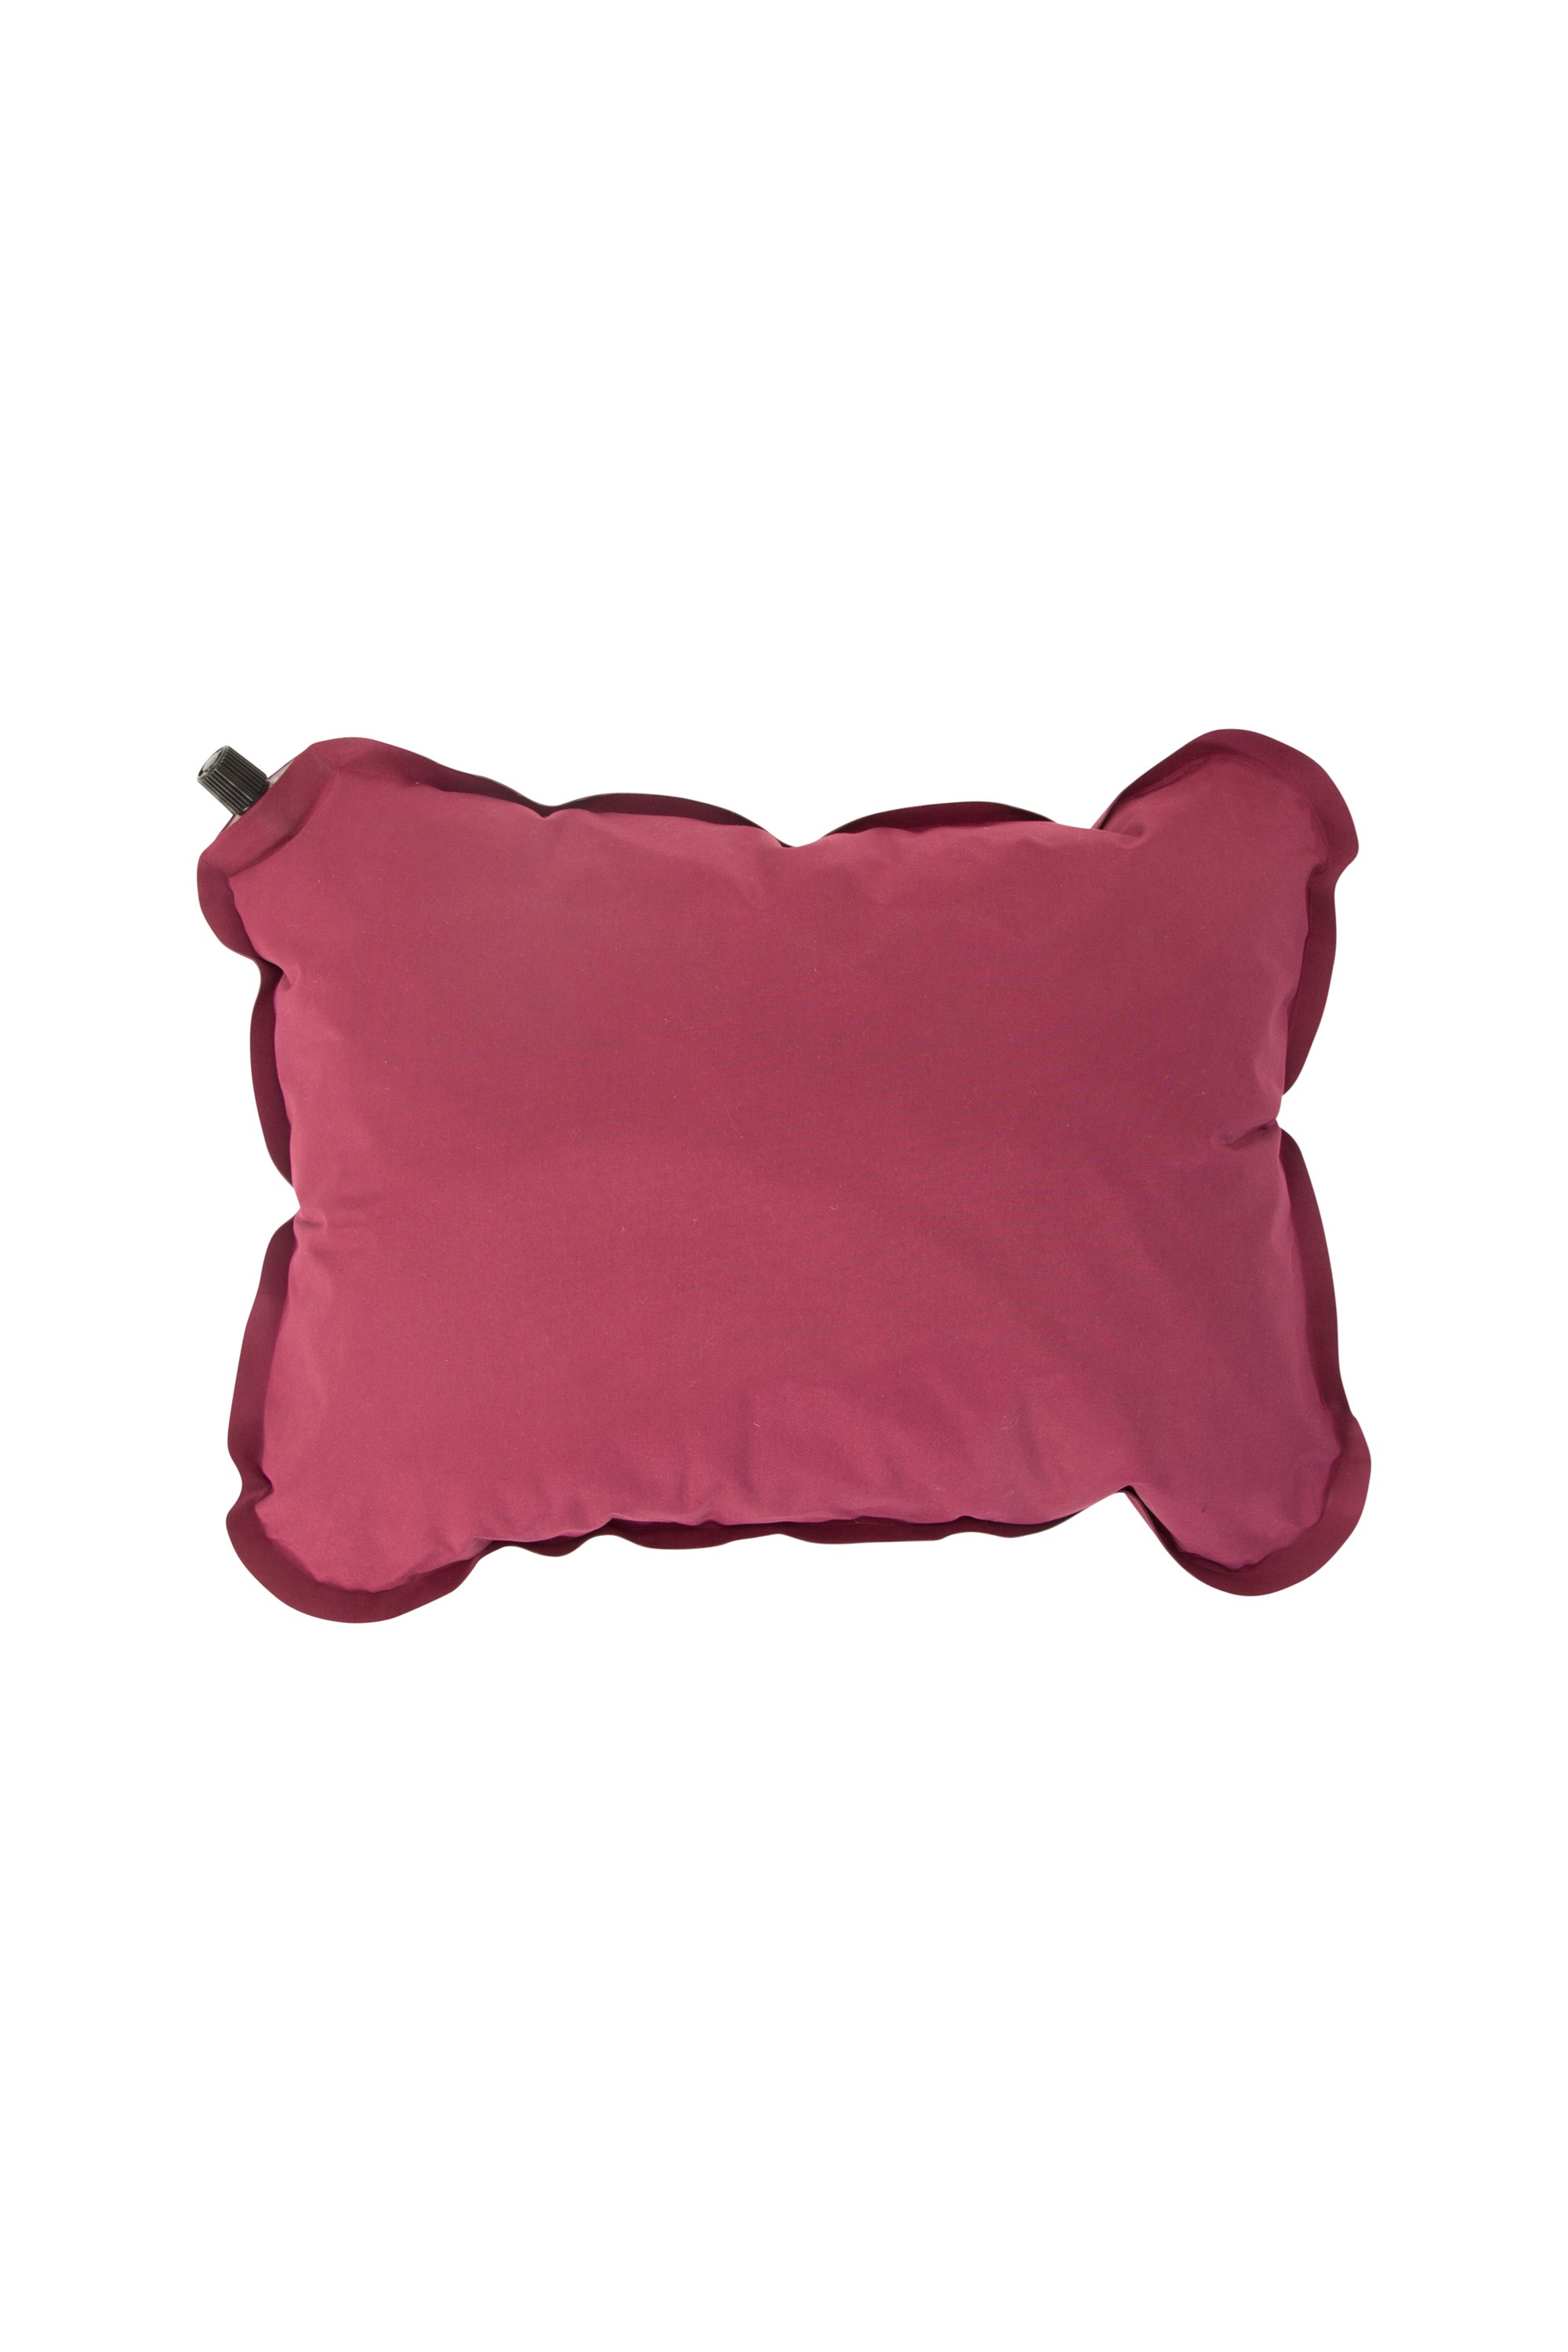 Self-inflating Pillow - Red